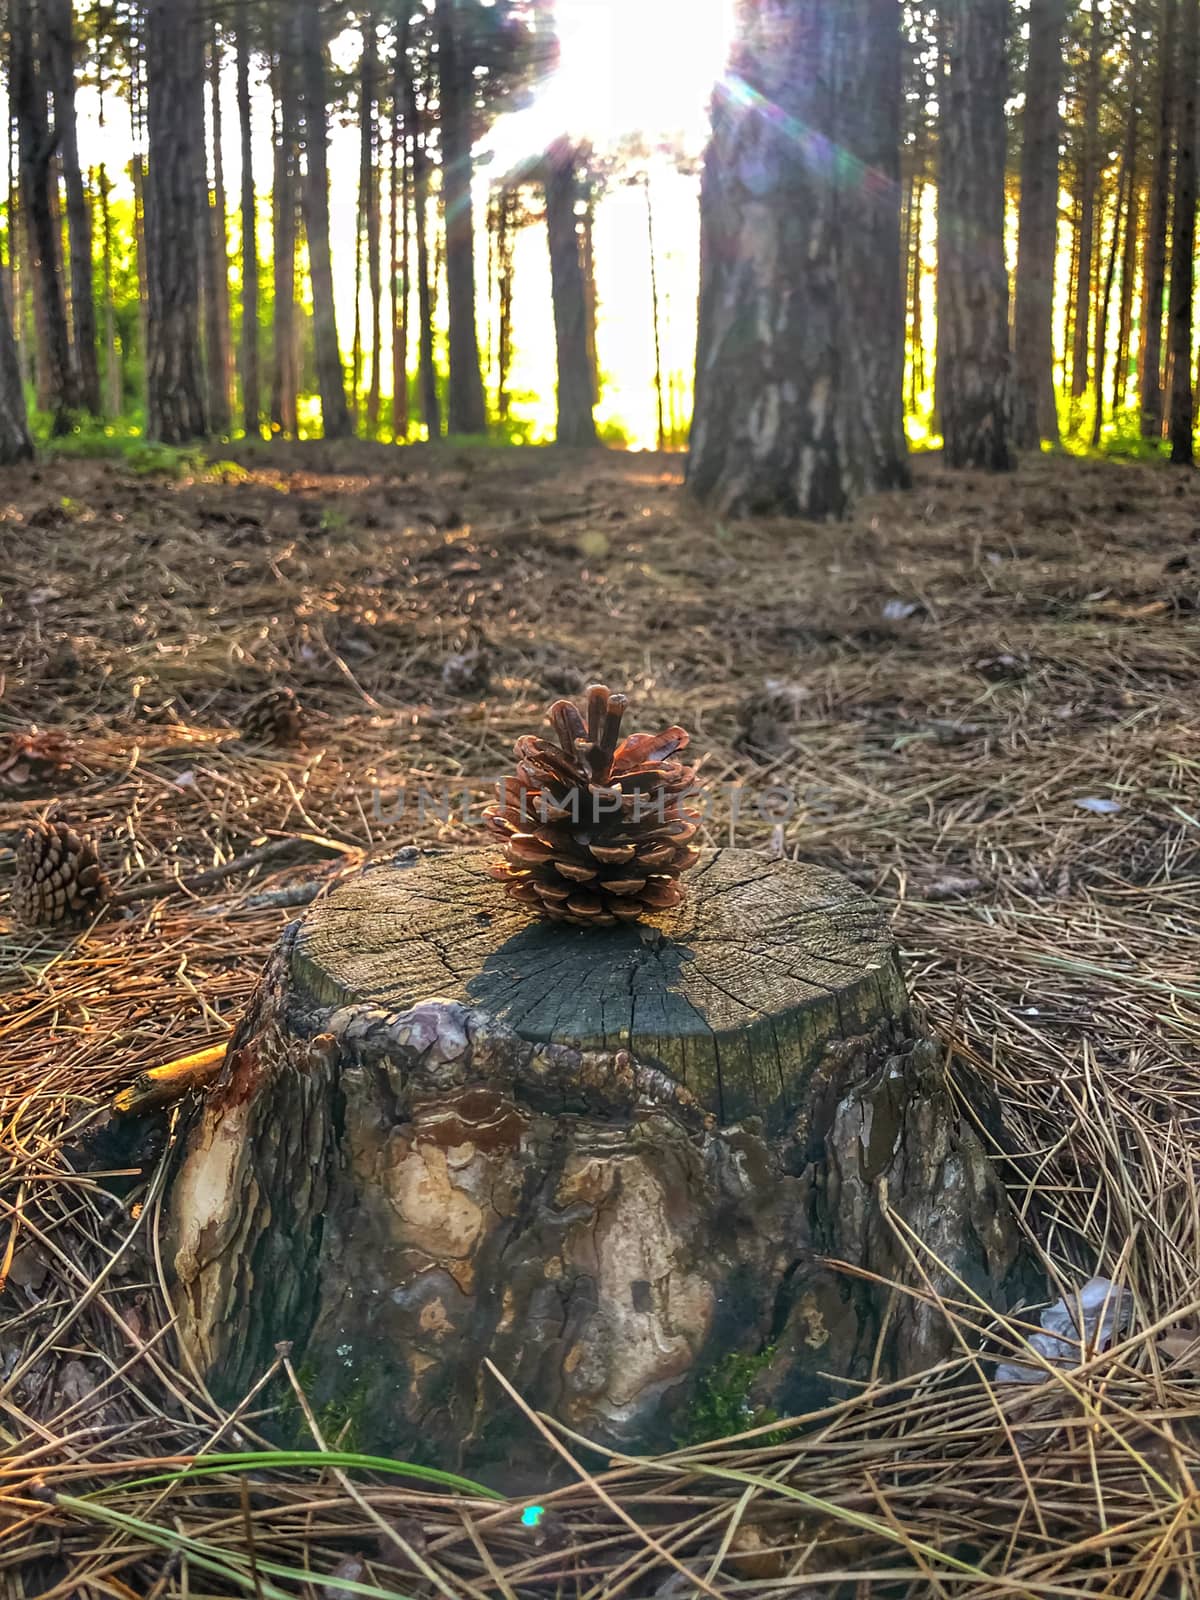 A pine cone is standing on a stump in the forest against a sunset.